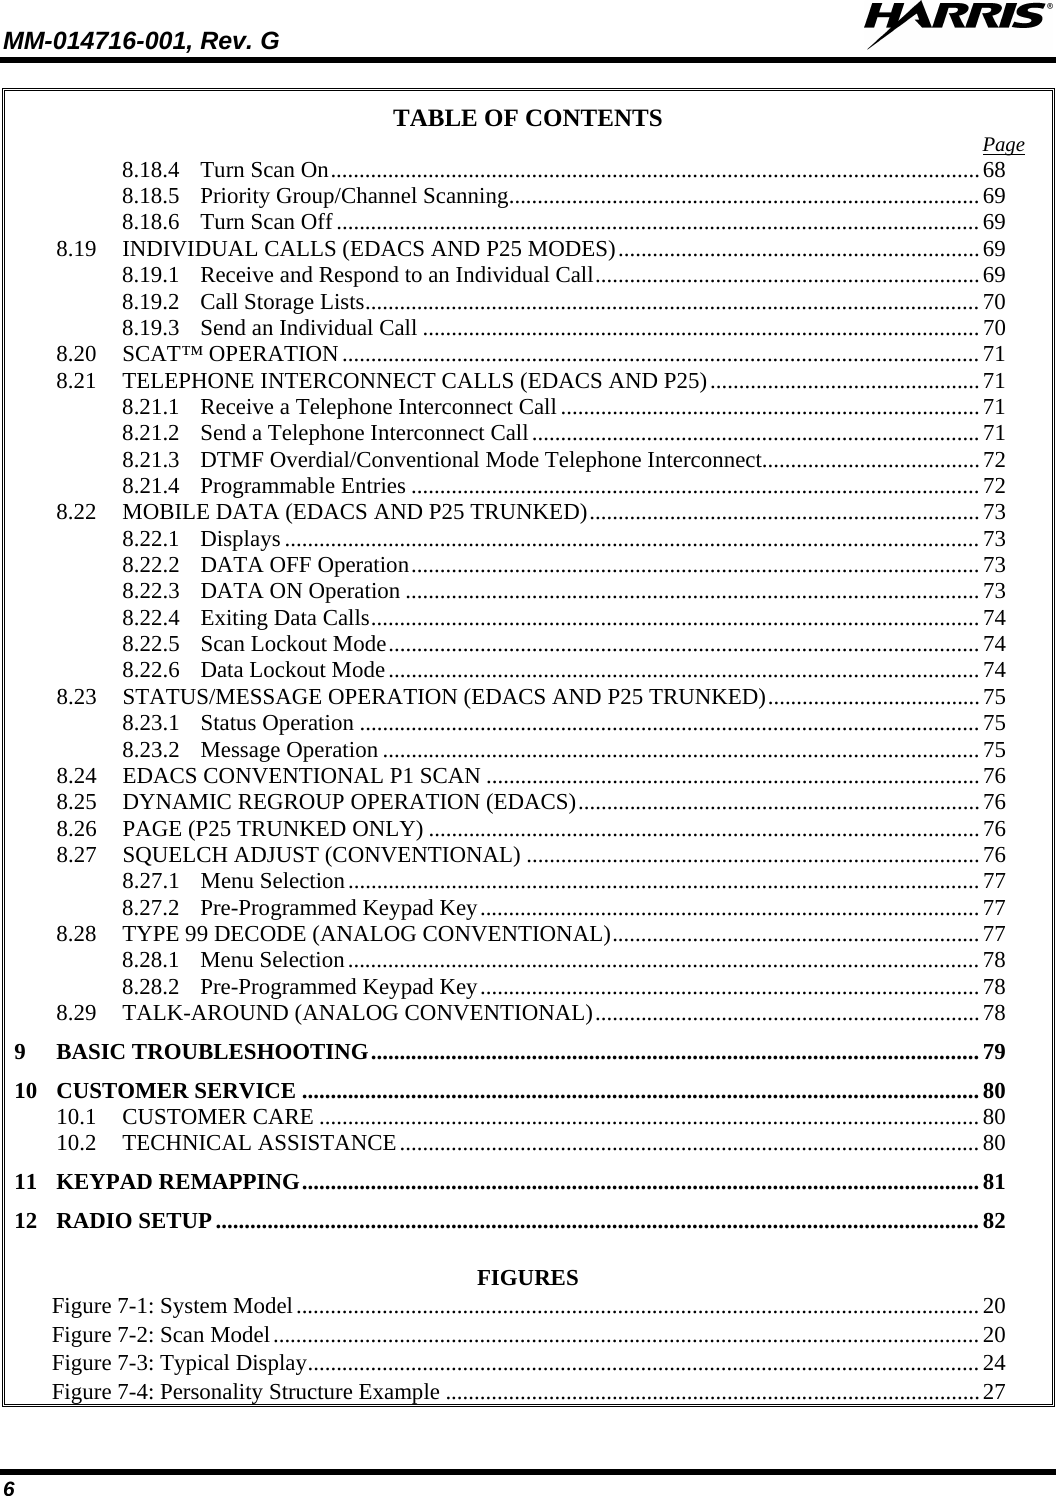 MM-014716-001, Rev. G  6 TABLE OF CONTENTS 8.18.4 Turn Scan On ................................................................................................................. 68Page  8.18.5 Priority Group/Channel Scanning .................................................................................. 69 8.18.6 Turn Scan Off ................................................................................................................ 69 8.19 INDIVIDUAL CALLS (EDACS AND P25 MODES) ............................................................... 69 8.19.1 Receive and Respond to an Individual Call ................................................................... 69 8.19.2 Call Storage Lists ........................................................................................................... 70 8.19.3 Send an Individual Call ................................................................................................. 70 8.20 SCAT™ OPERATION ............................................................................................................... 71 8.21 TELEPHONE INTERCONNECT CALLS (EDACS AND P25) ............................................... 71 8.21.1 Receive a Telephone Interconnect Call ......................................................................... 71 8.21.2 Send a Telephone Interconnect Call .............................................................................. 71 8.21.3 DTMF Overdial/Conventional Mode Telephone Interconnect ...................................... 72 8.21.4 Programmable Entries ................................................................................................... 72 8.22 MOBILE DATA (EDACS AND P25 TRUNKED) .................................................................... 73 8.22.1 Displays ......................................................................................................................... 73 8.22.2 DATA OFF Operation ................................................................................................... 73 8.22.3 DATA ON Operation .................................................................................................... 73 8.22.4 Exiting Data Calls .......................................................................................................... 74 8.22.5 Scan Lockout Mode ....................................................................................................... 74 8.22.6 Data Lockout Mode ....................................................................................................... 74 8.23 STATUS/MESSAGE OPERATION (EDACS AND P25 TRUNKED) ..................................... 75 8.23.1 Status Operation ............................................................................................................ 75 8.23.2 Message Operation ........................................................................................................ 75 8.24 EDACS CONVENTIONAL P1 SCAN ...................................................................................... 76 8.25 DYNAMIC REGROUP OPERATION (EDACS) ...................................................................... 76 8.26 PAGE (P25 TRUNKED ONLY) ................................................................................................ 76 8.27 SQUELCH ADJUST (CONVENTIONAL) ............................................................................... 76 8.27.1 Menu Selection .............................................................................................................. 77 8.27.2 Pre-Programmed Keypad Key ....................................................................................... 77 8.28 TYPE 99 DECODE (ANALOG CONVENTIONAL) ................................................................ 77 8.28.1 Menu Selection .............................................................................................................. 78 8.28.2 Pre-Programmed Keypad Key ....................................................................................... 78 8.29 TALK-AROUND (ANALOG CONVENTIONAL) ................................................................... 78 9 BASIC TROUBLESHOOTING .......................................................................................................... 79 10 CUSTOMER SERVICE ...................................................................................................................... 80 10.1 CUSTOMER CARE ................................................................................................................... 80 10.2 TECHNICAL ASSISTANCE ..................................................................................................... 80 11 KEYPAD REMAPPING ...................................................................................................................... 81 12 RADIO SETUP ..................................................................................................................................... 82  FIGURES Figure 7-1: System Model   ....................................................................................................................... 20Figure 7-2: Scan Model   ........................................................................................................................... 20Figure 7-3: Typical Display   ..................................................................................................................... 24Figure 7-4: Personality Structure Example  ............................................................................................. 27